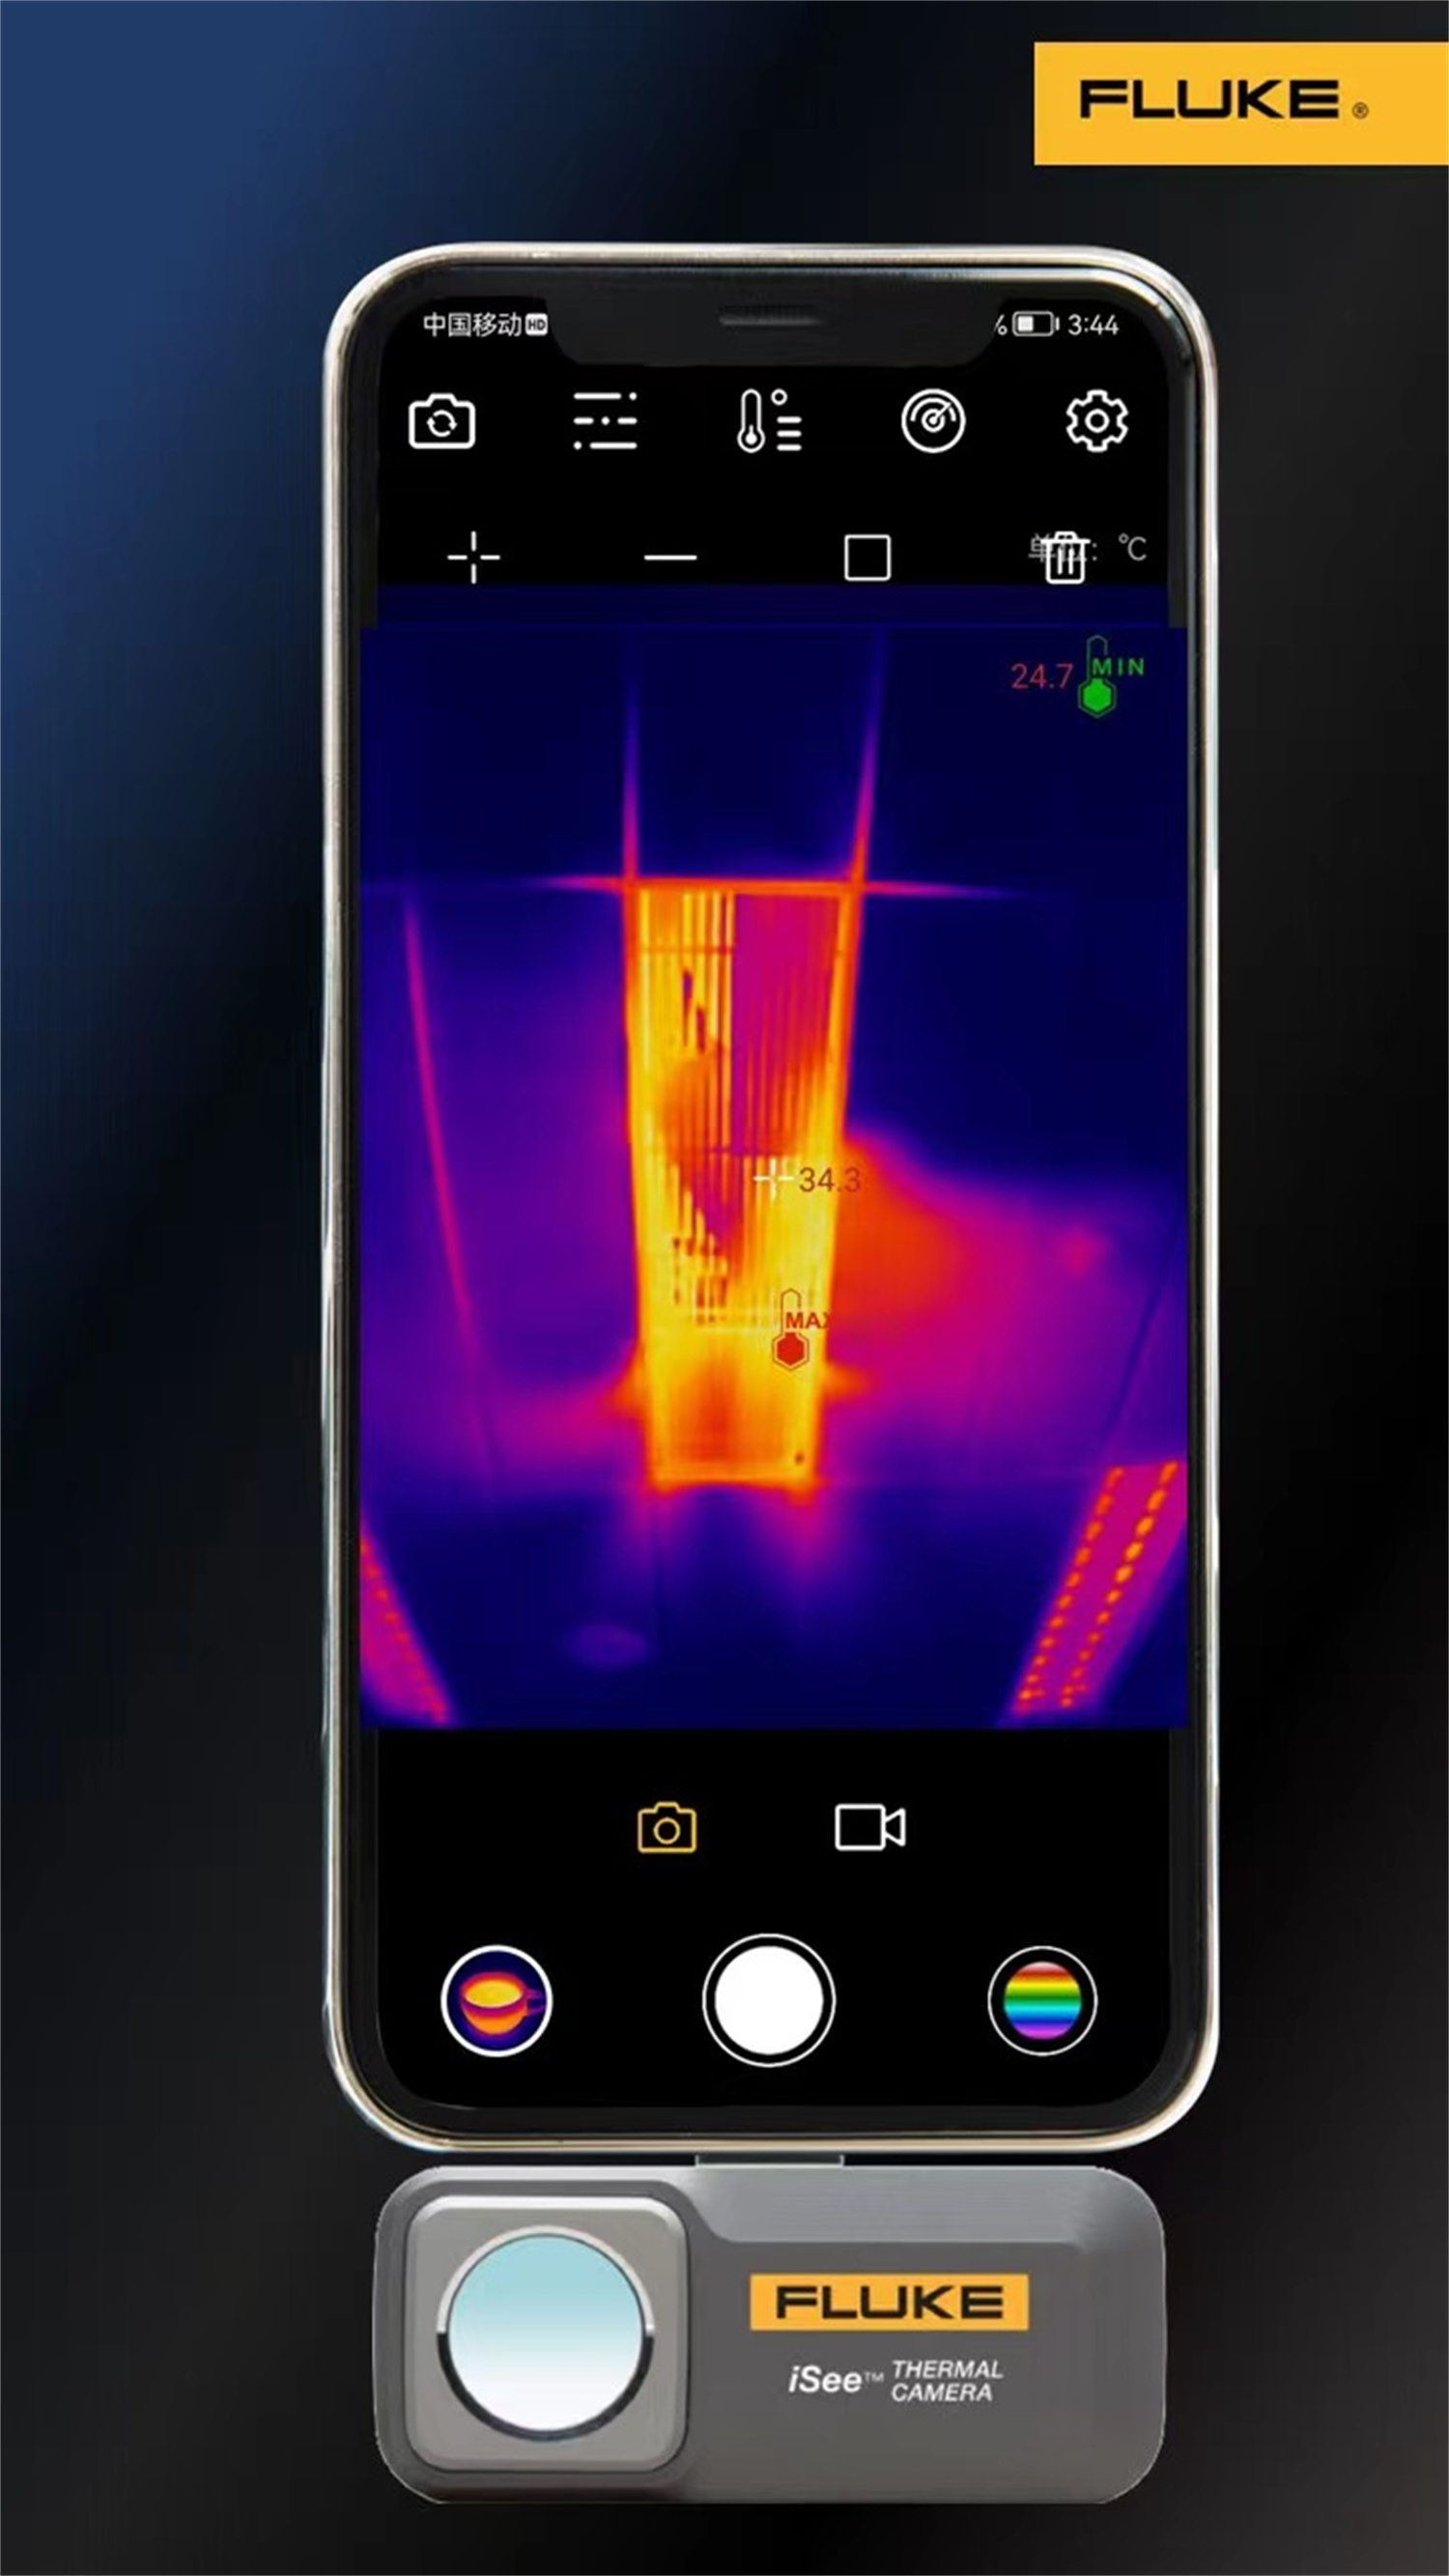 Fluke TC01A Thermal Camera For Phone Construction Imager Thermographic Smartphone Repair Cell Phone Infrared Professional